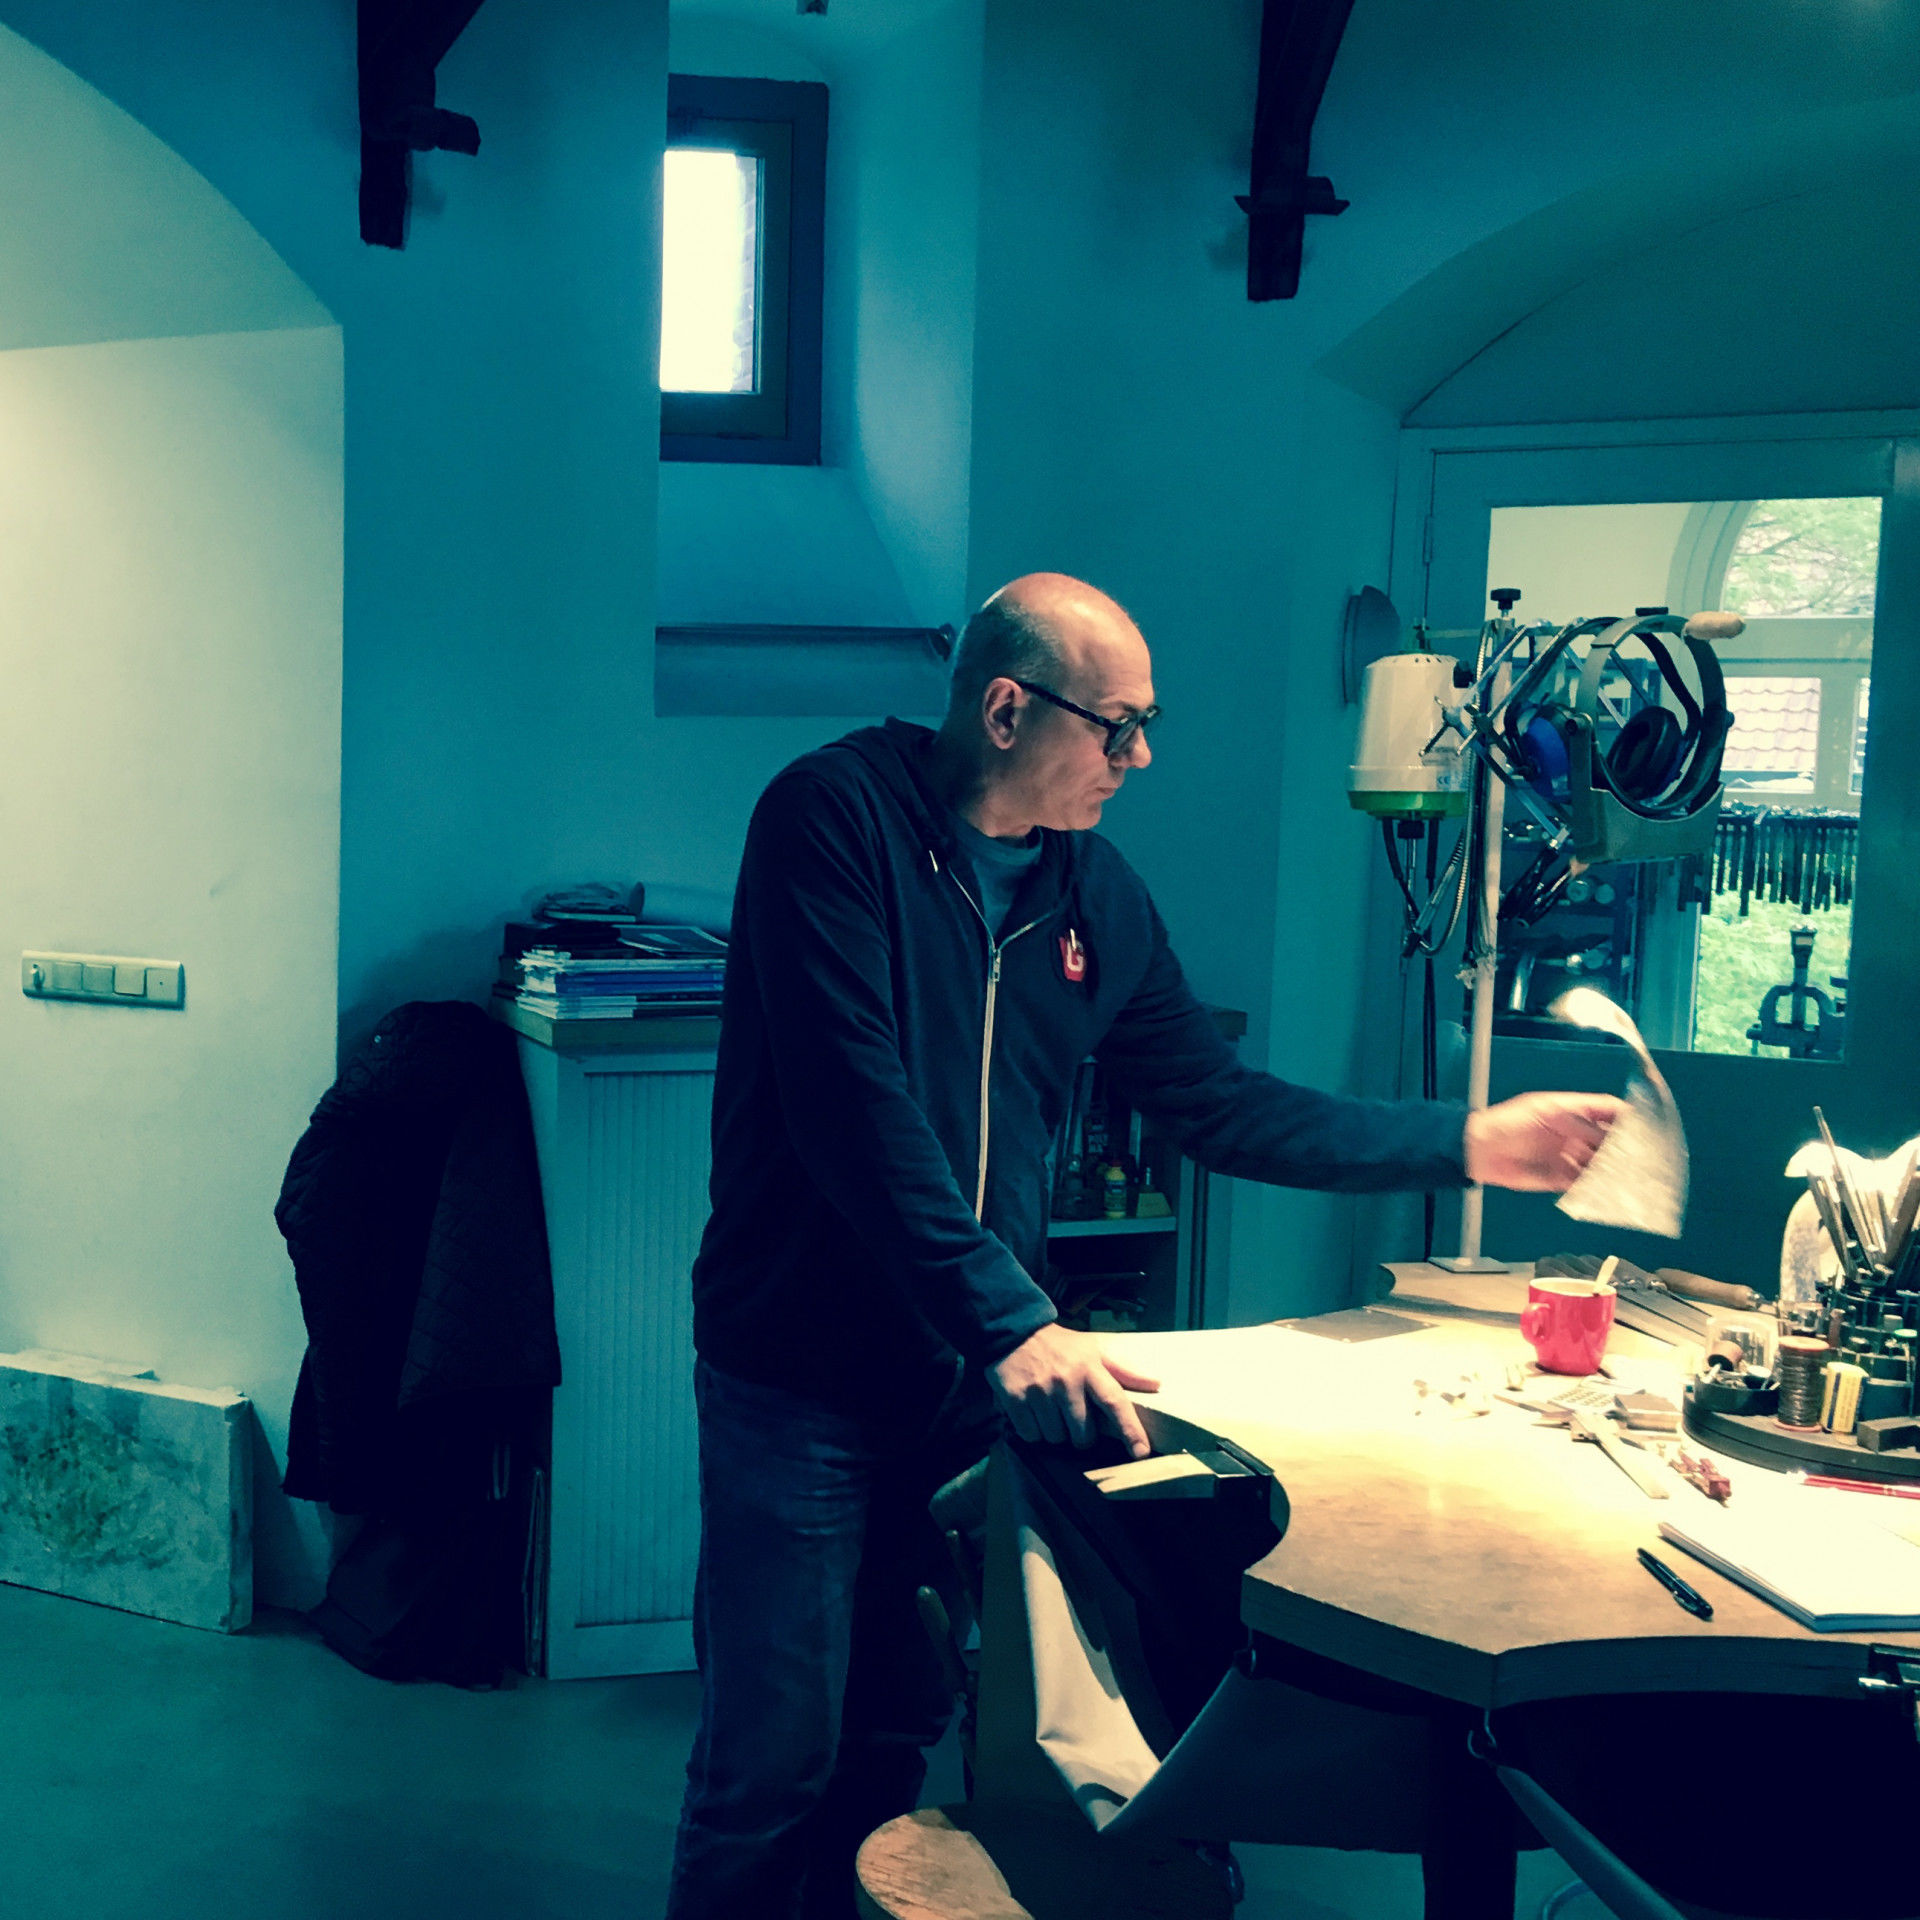 Paul de Vries in his studio, situated in the water tower. 